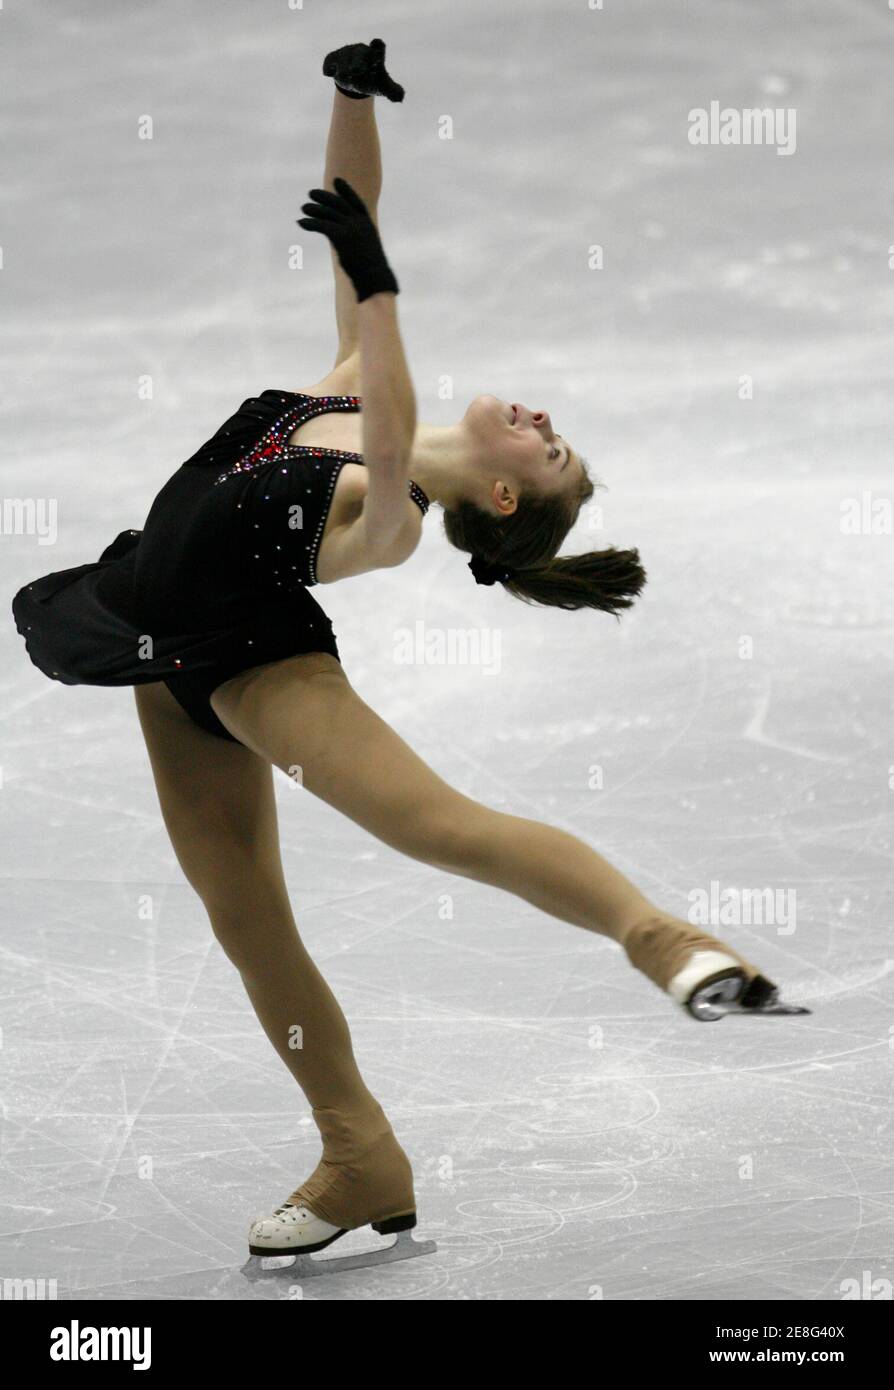 Ashley Wagner from the U.S. practises during a training session before the ISU Four Continents Figure Skating Championships 2008 in Goyang, about 20 km (12 miles) northwest of Seoul, February 11, 2008.  REUTERS/Jo Yong-Hak (SOUTH KOREA) Stock Photo